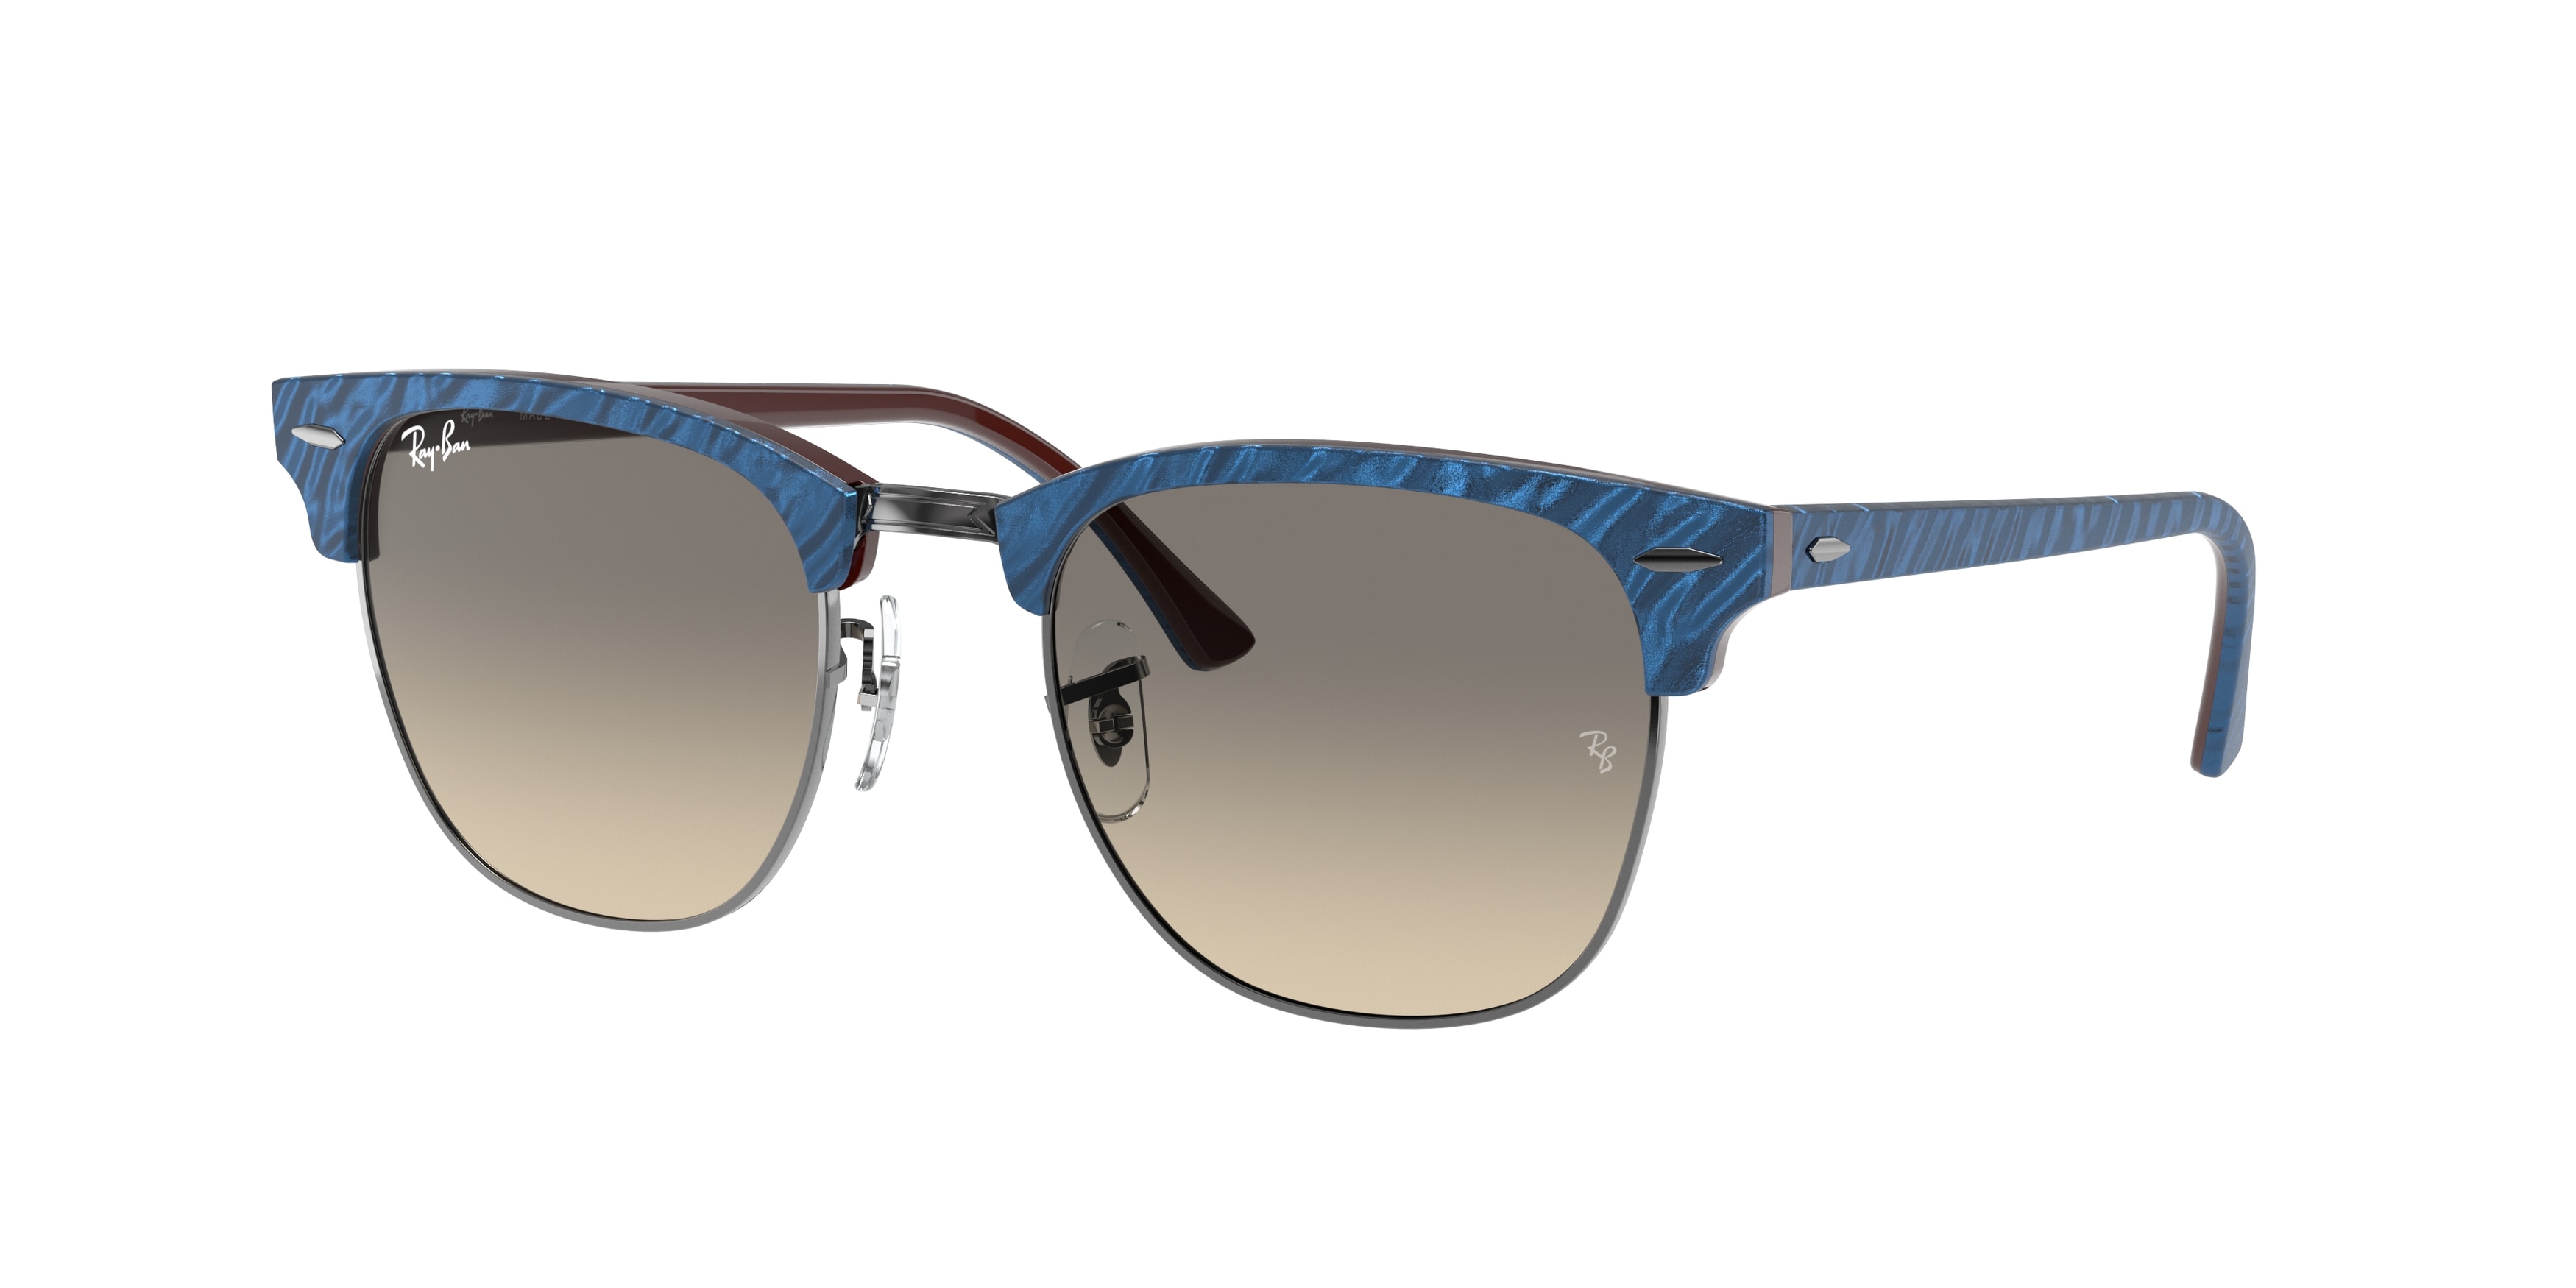 Ray Ban RB3016 131032 Clubmaster 